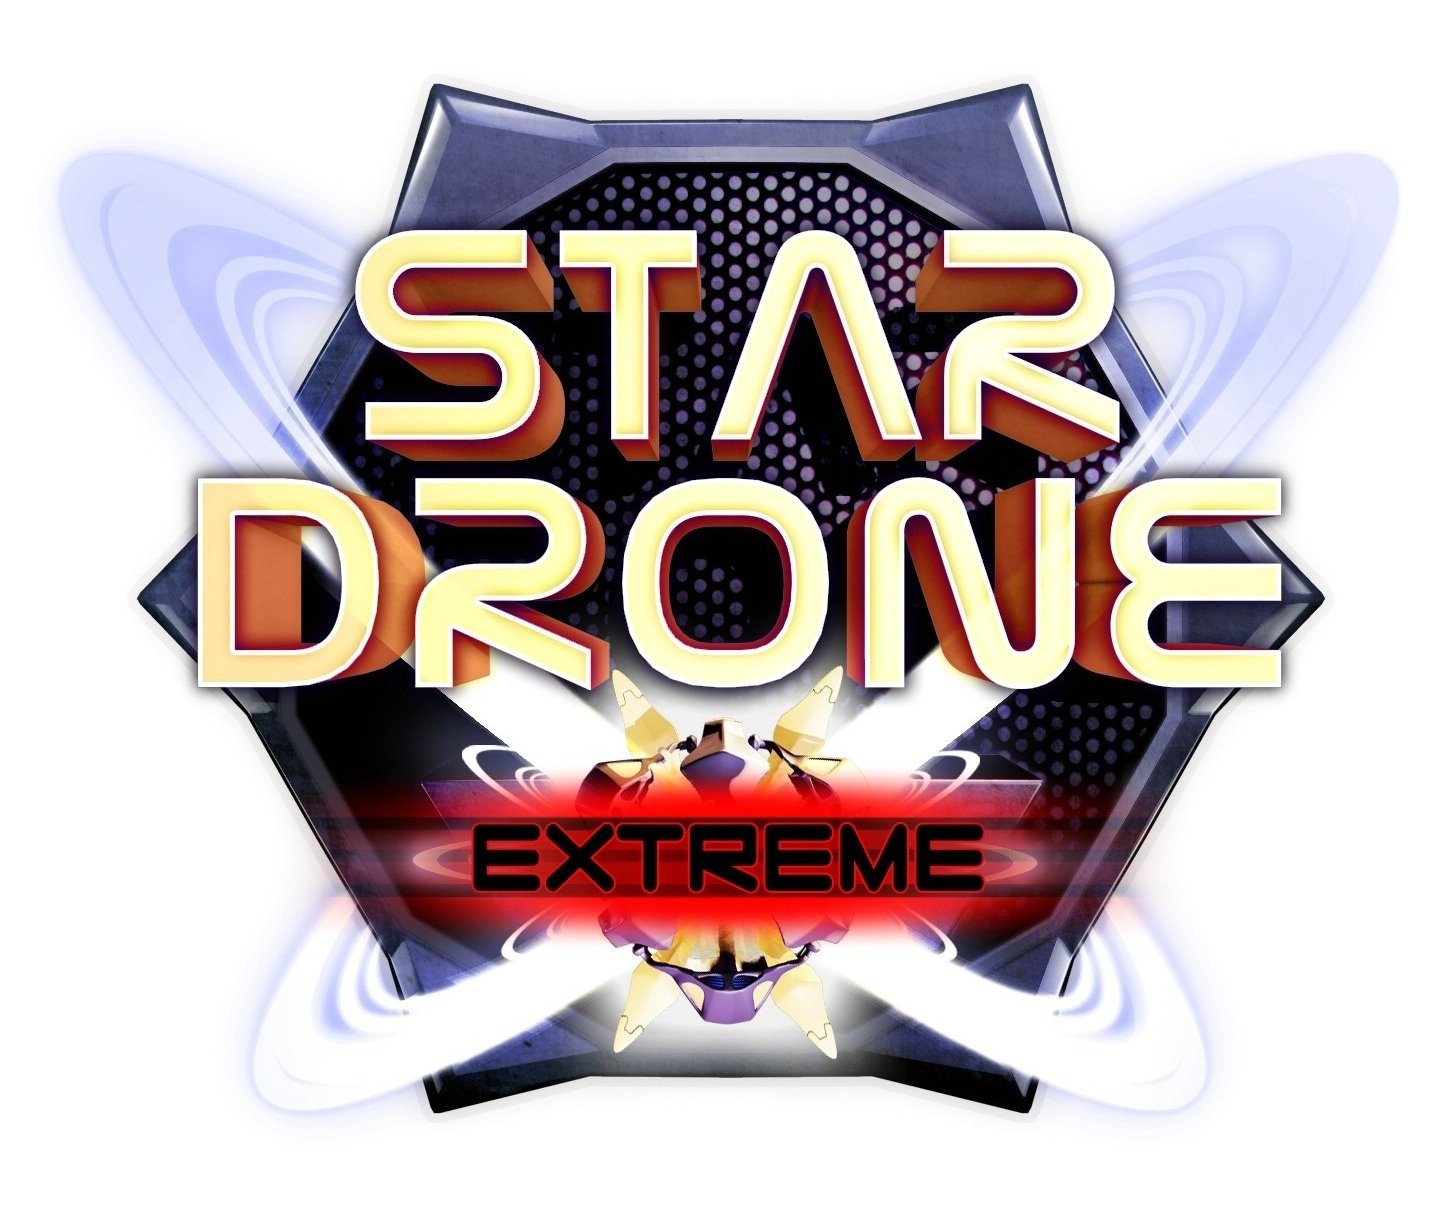 Image of StarDrone Extreme